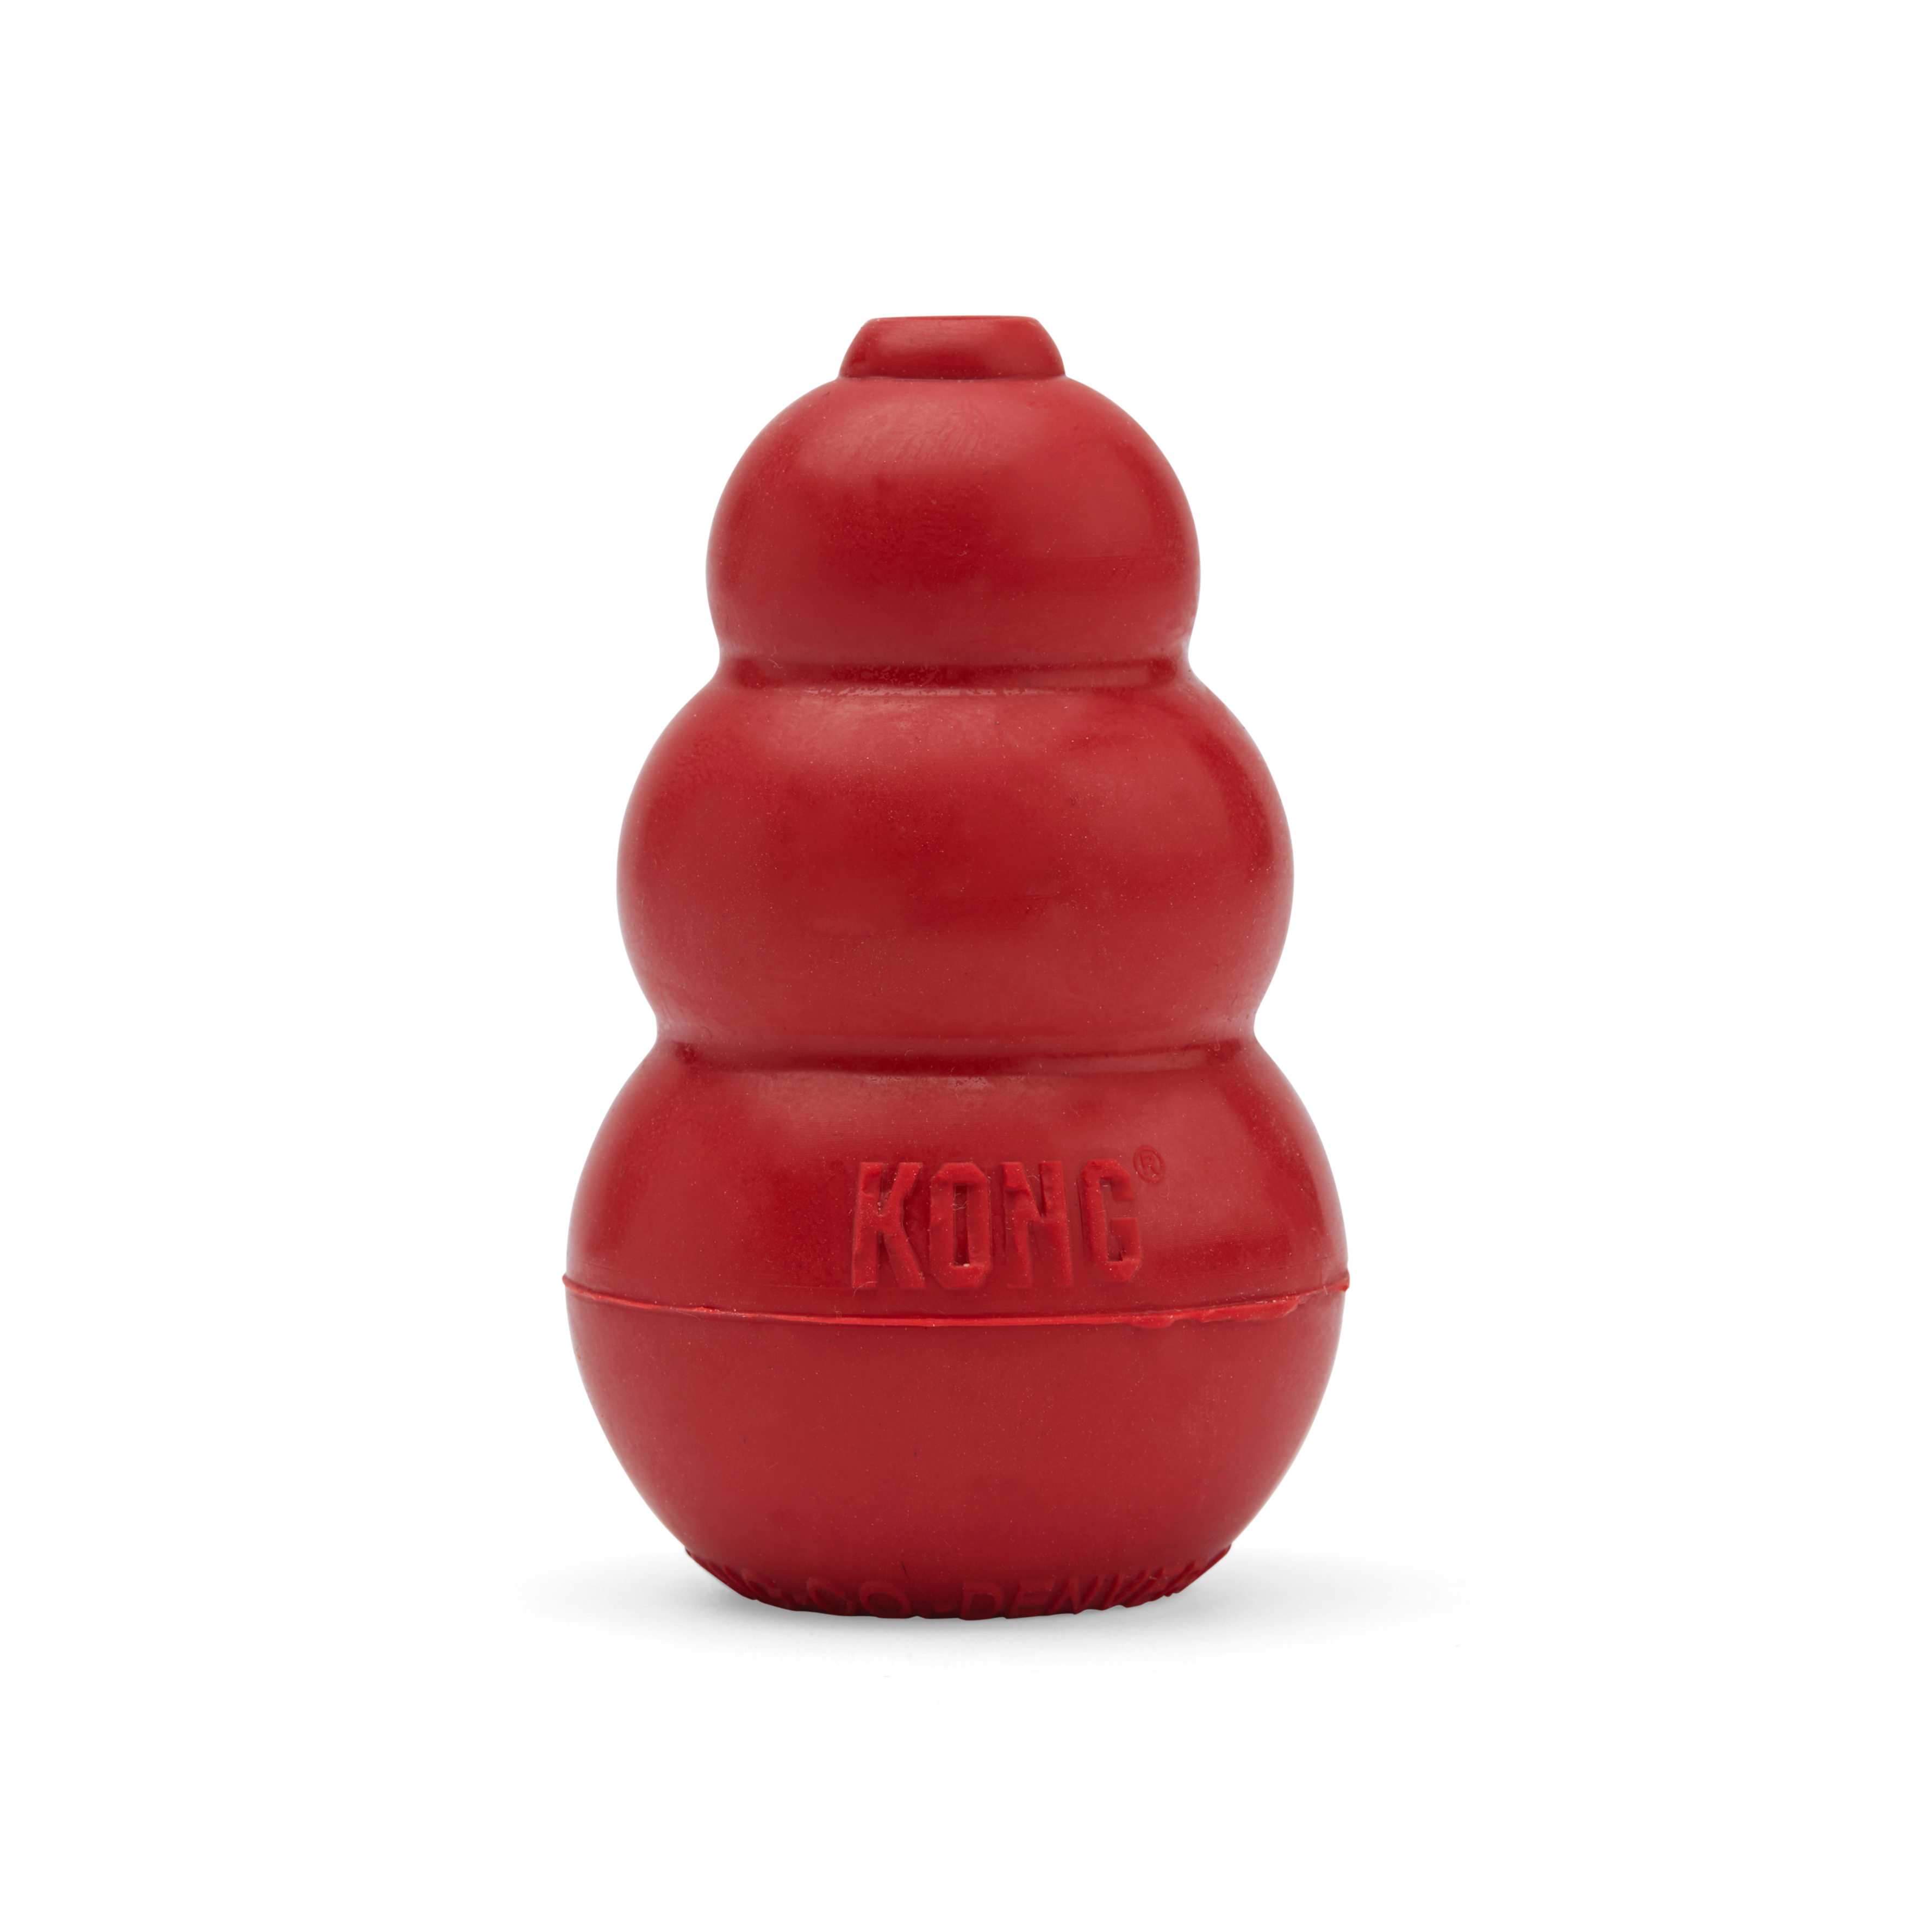 Kong Classic Dog Toy X Small Petco